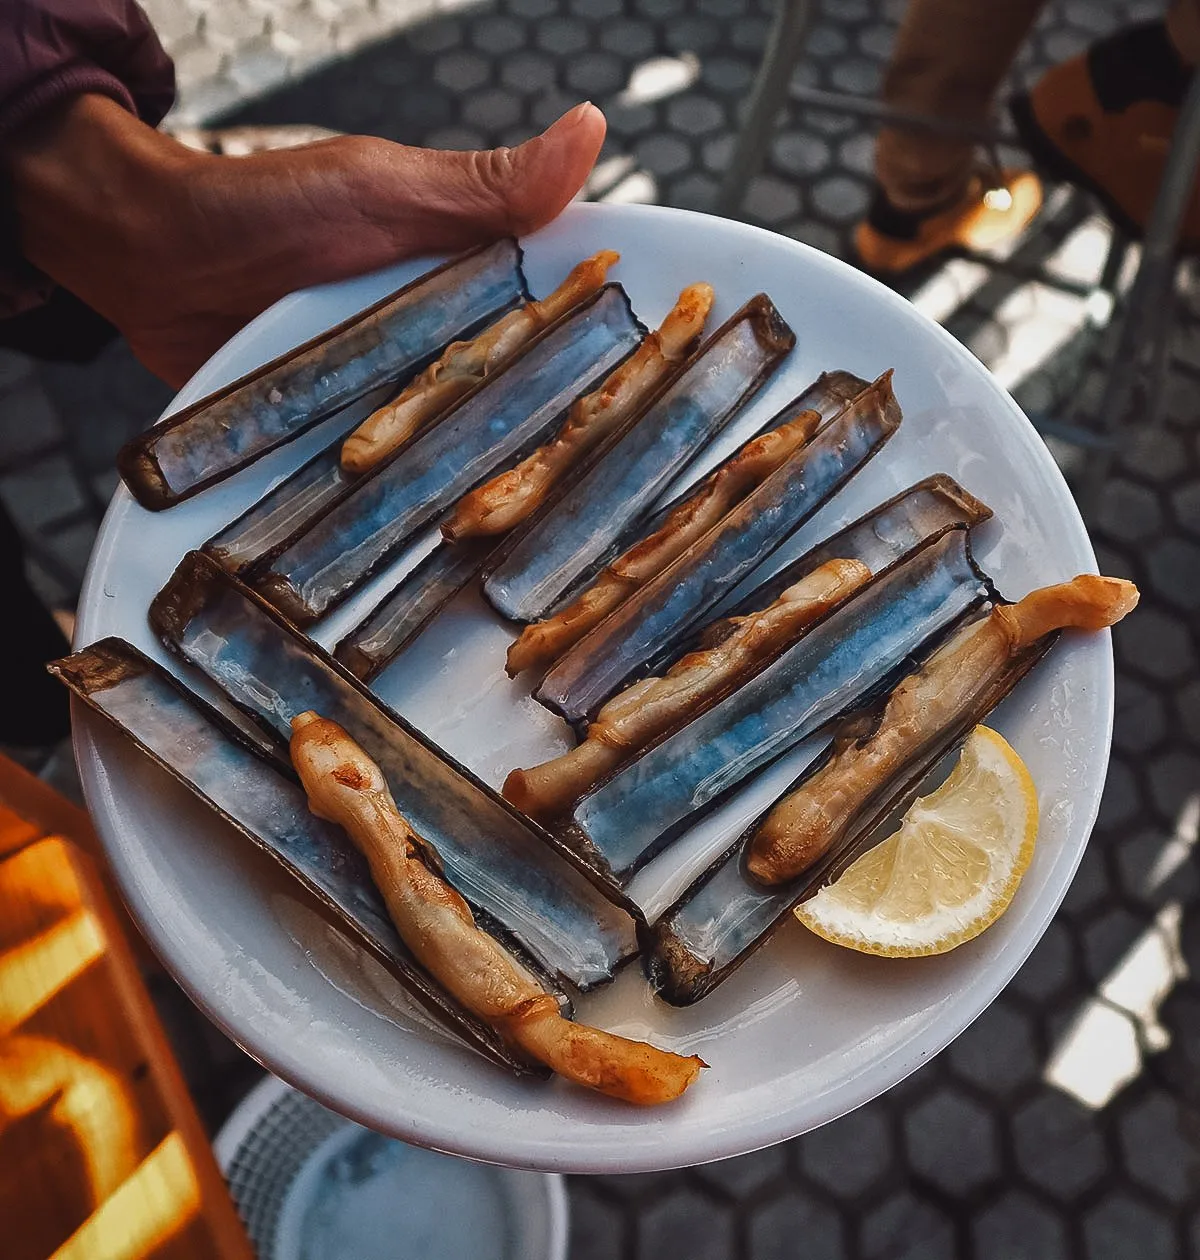 Razor clams at a restaurant in Seville